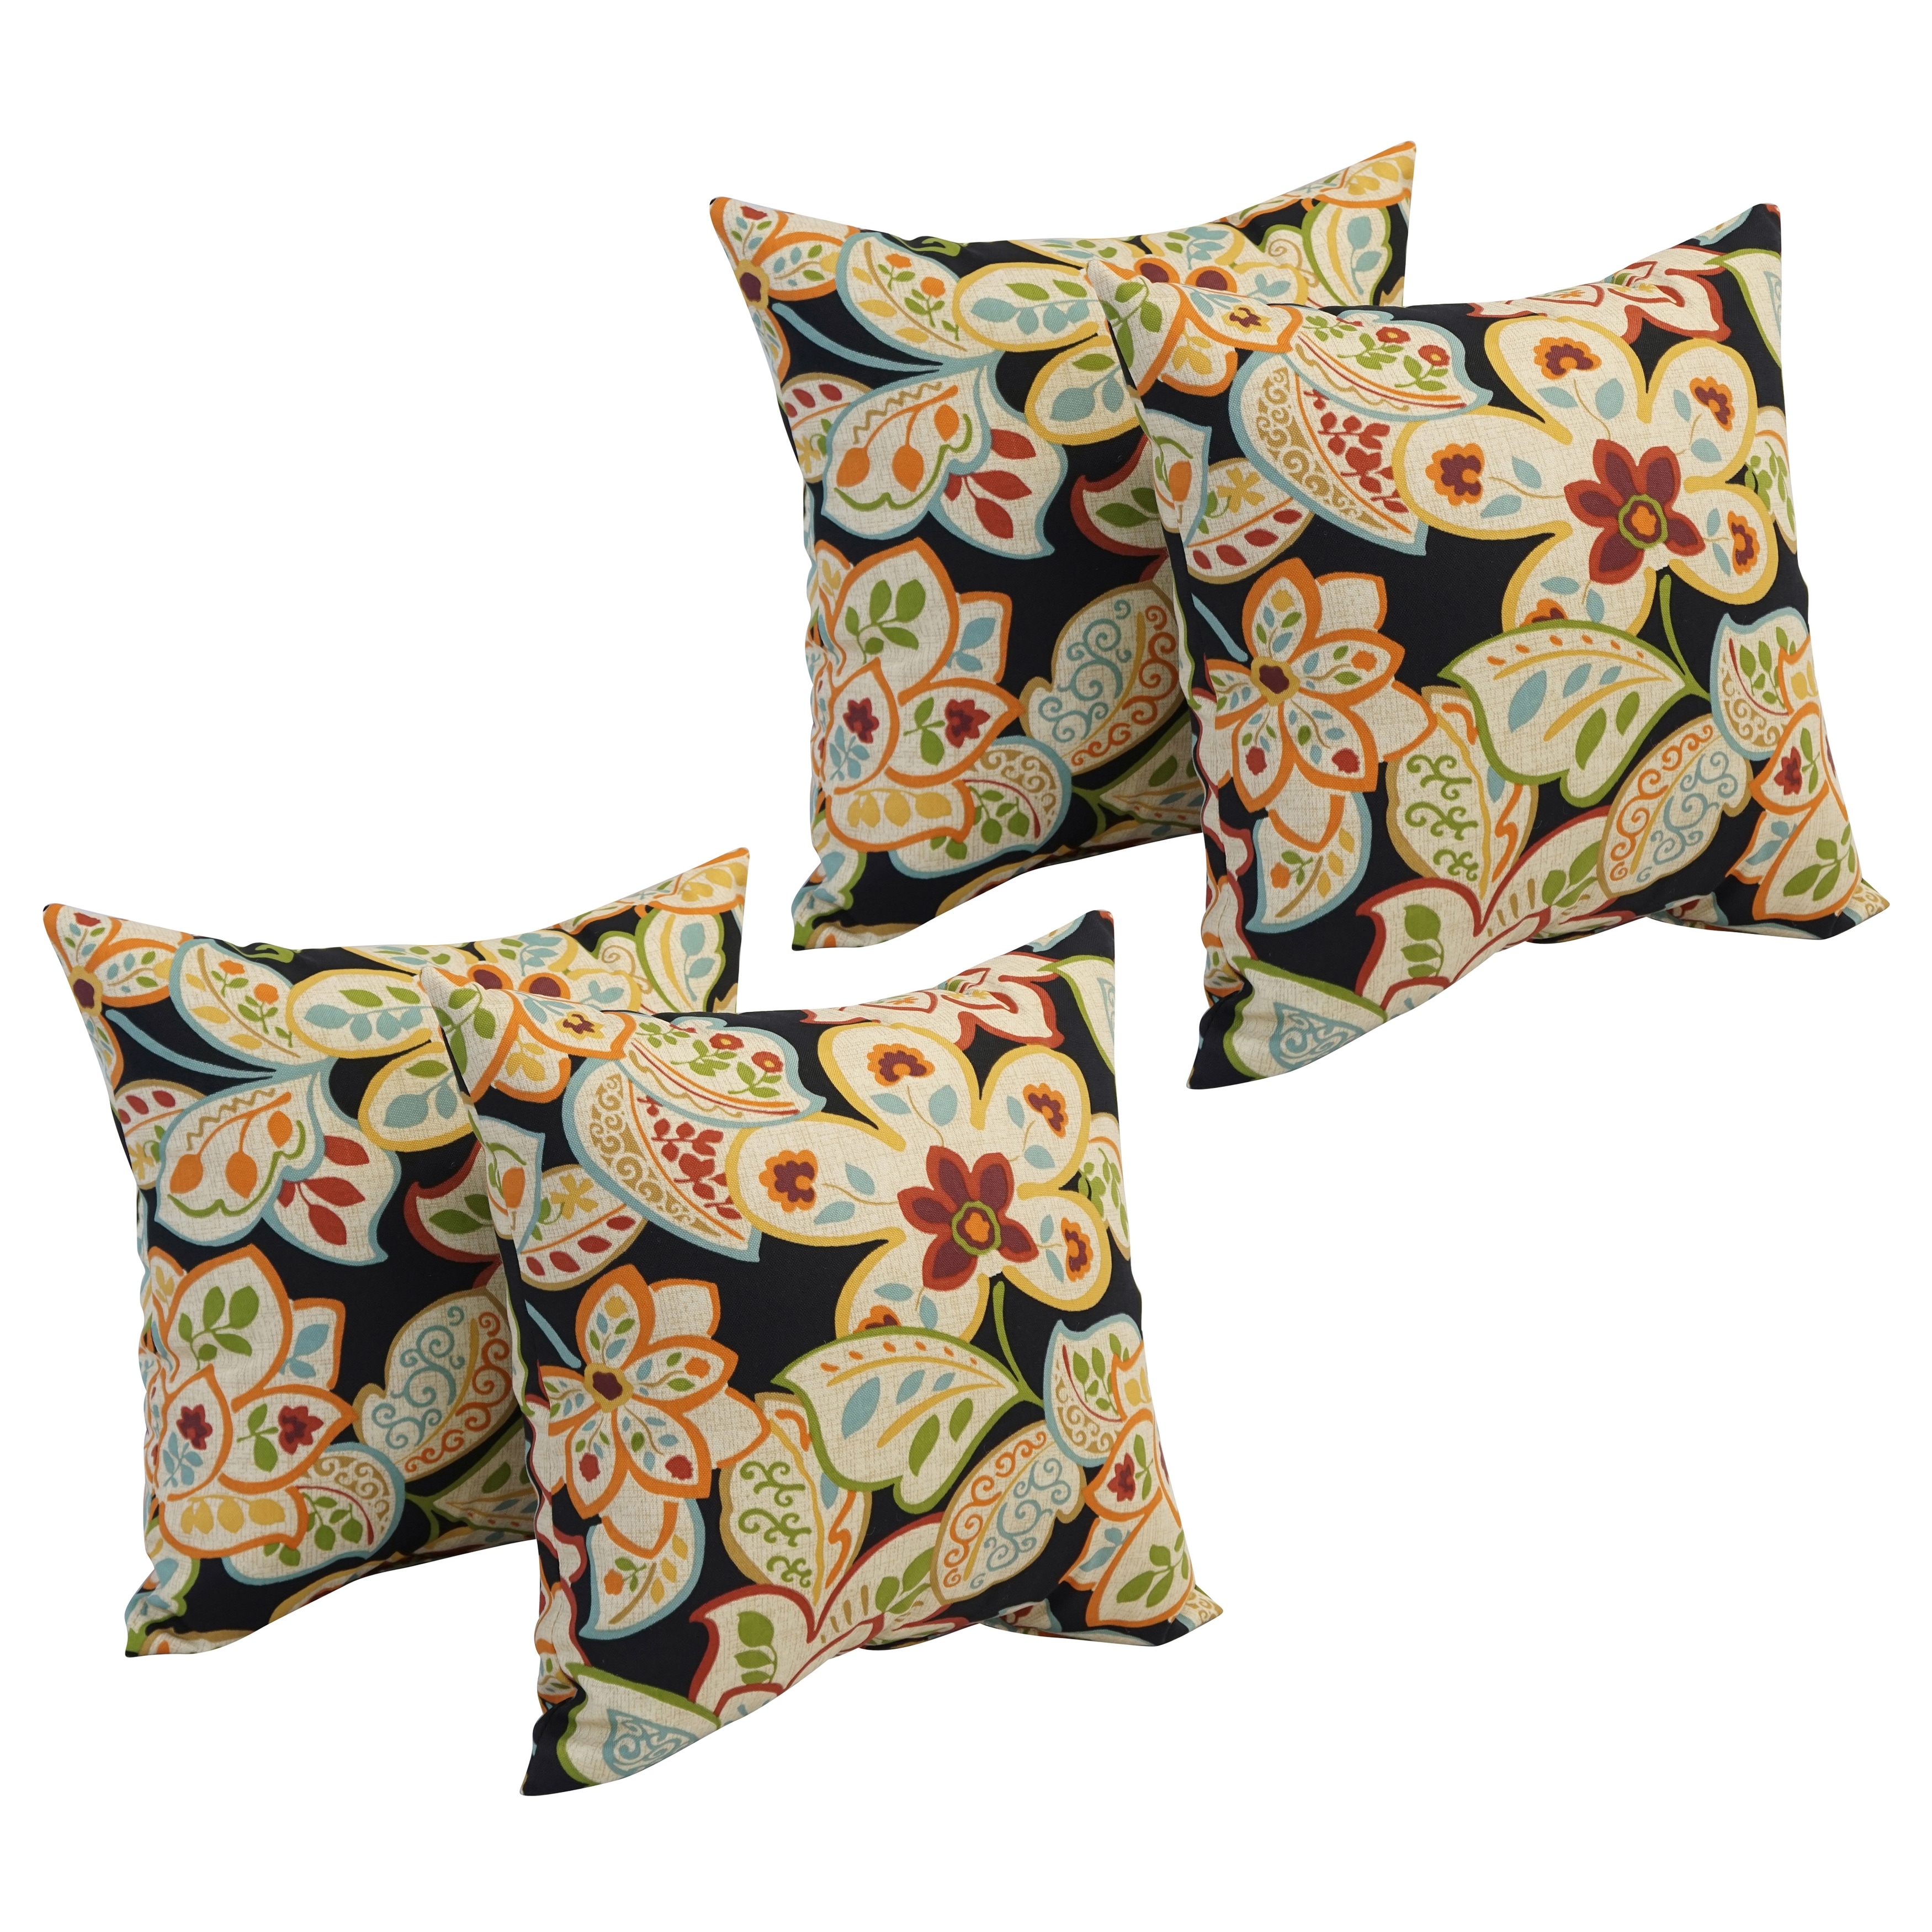 https://ak1.ostkcdn.com/images/products/is/images/direct/513be7b1858c786ccac4ef6fedd7fd0570ceb108/17-inch-Square-Polyester-Outdoor-Throw-Pillows-%28Set-of-4%29.jpg